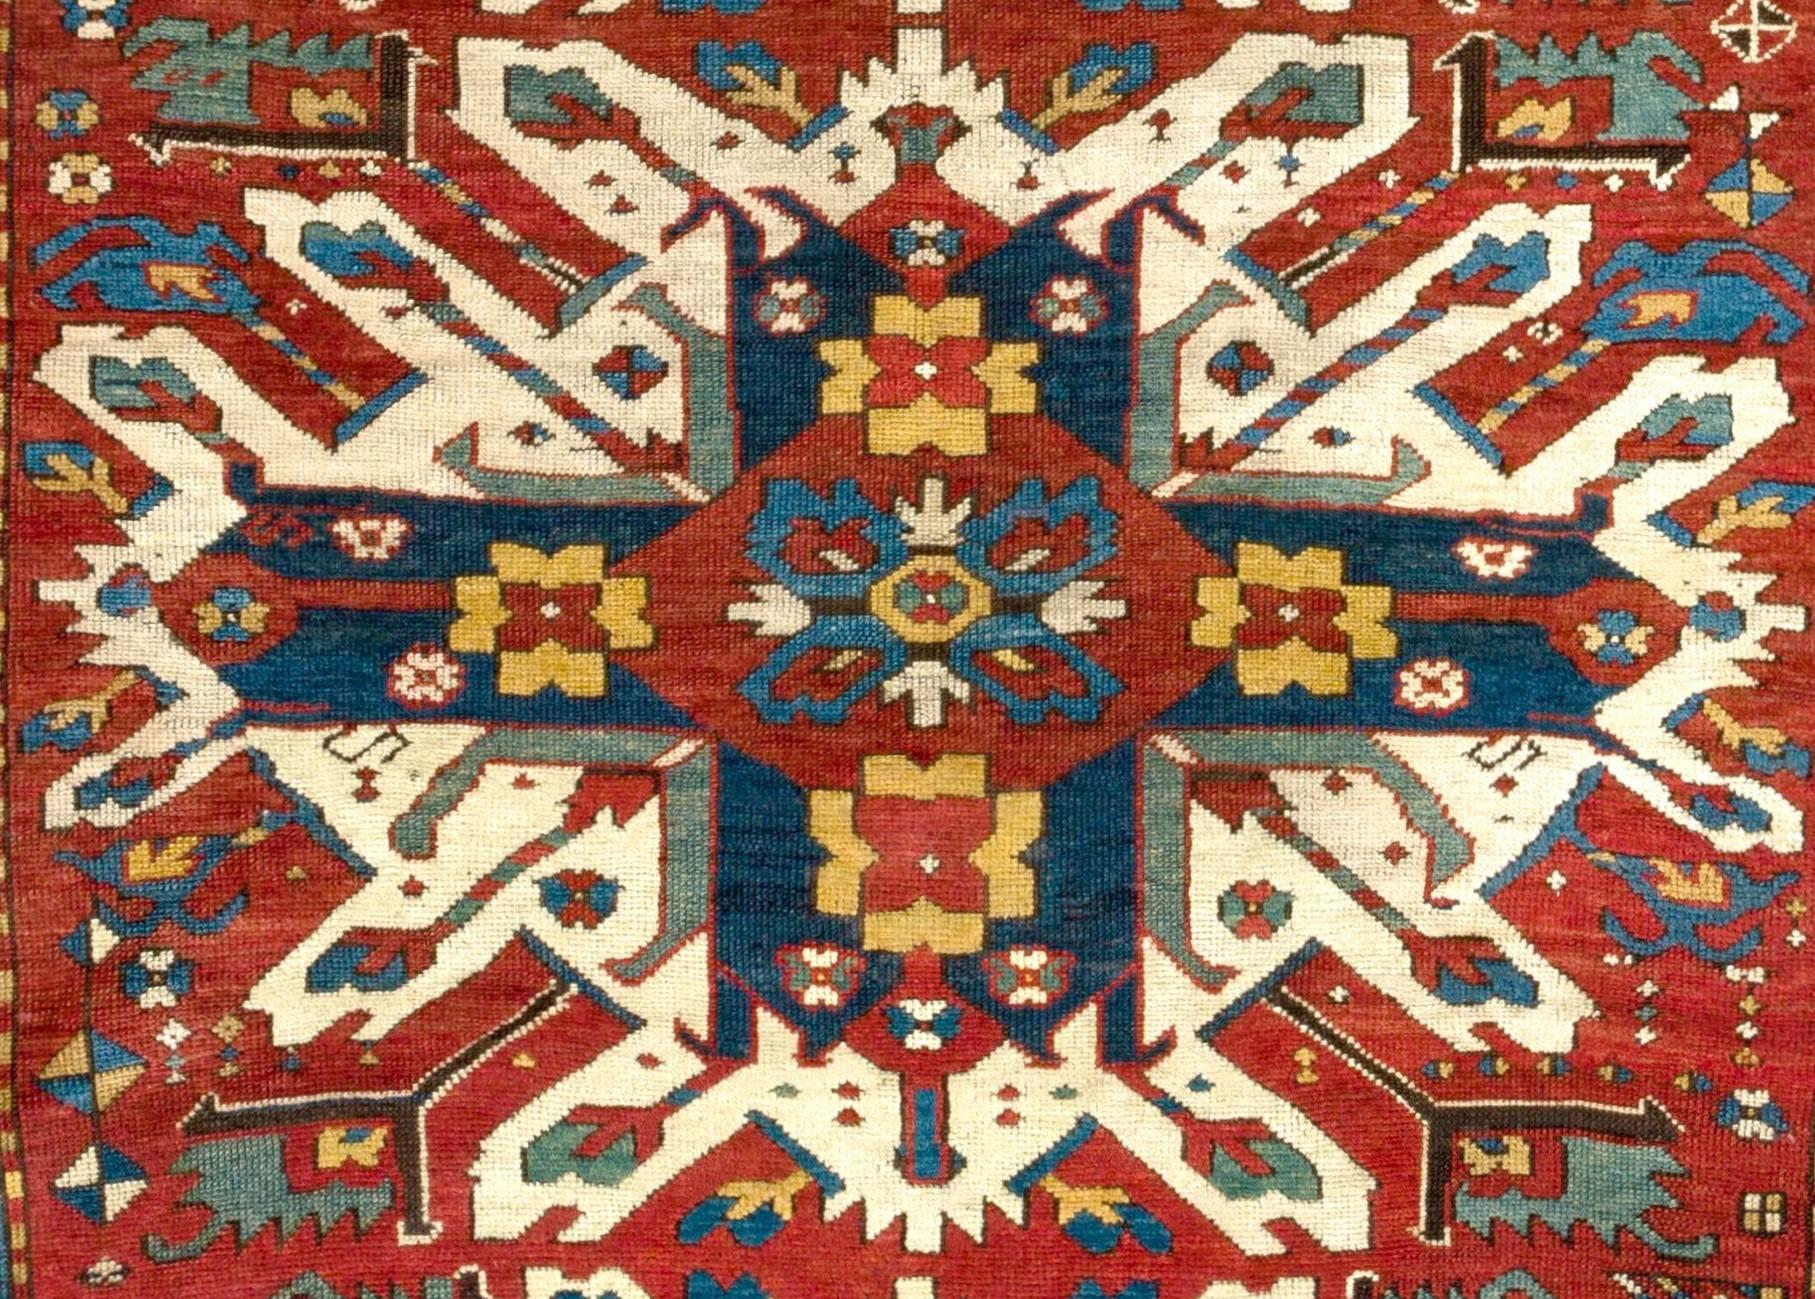 A splendid antique Caucasian rug from the village of Chelaberd in Southern Karabagh. This highly popular so called sunburst or eagle Kazak design rugs are some of the most collectible and sought after ones among all antique Caucasian works of